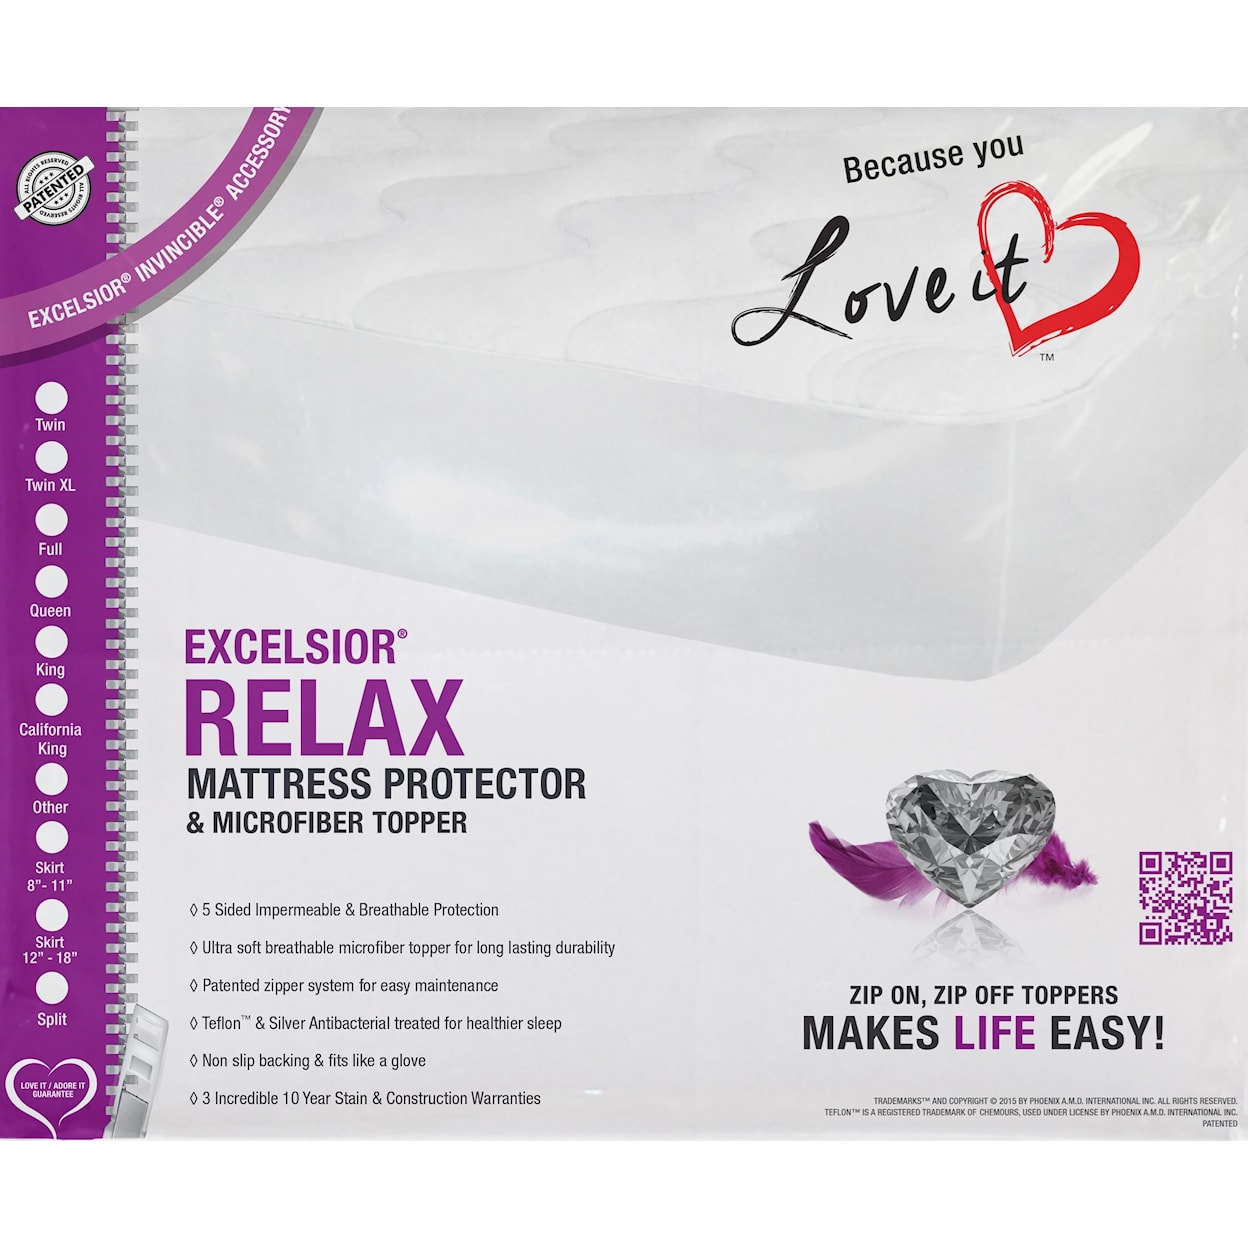 Excelsior Relax 10" Twin XL Mattress Protector